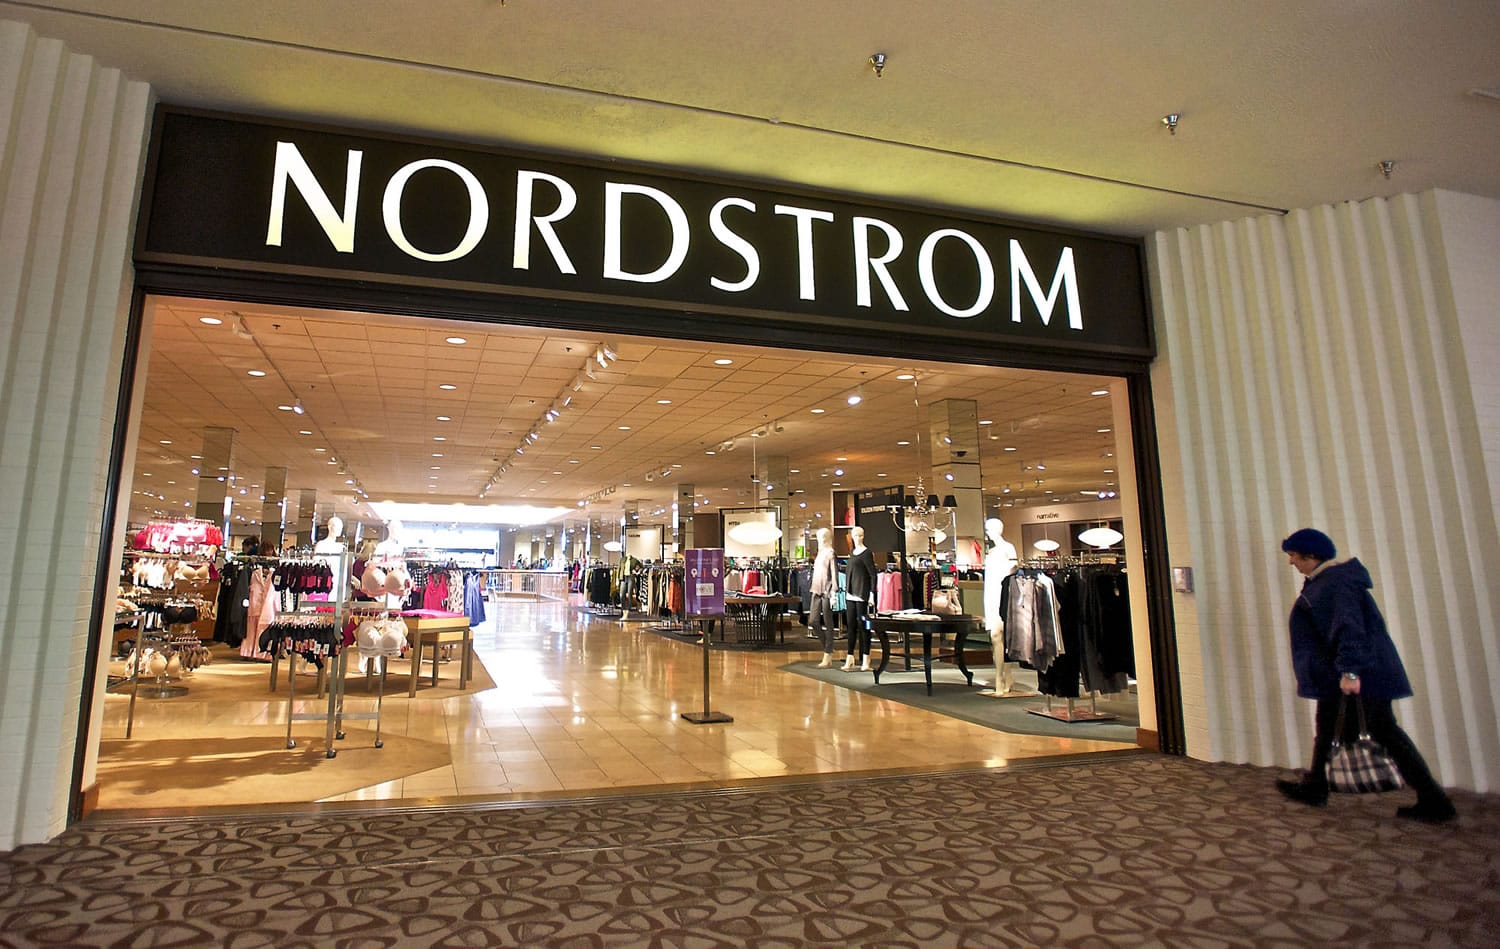 Nordstrom at the Westfield Vancouver Mall, which has operated in Vancouver since the mall opened in 1977, will be closing its doors for good in January 2015.